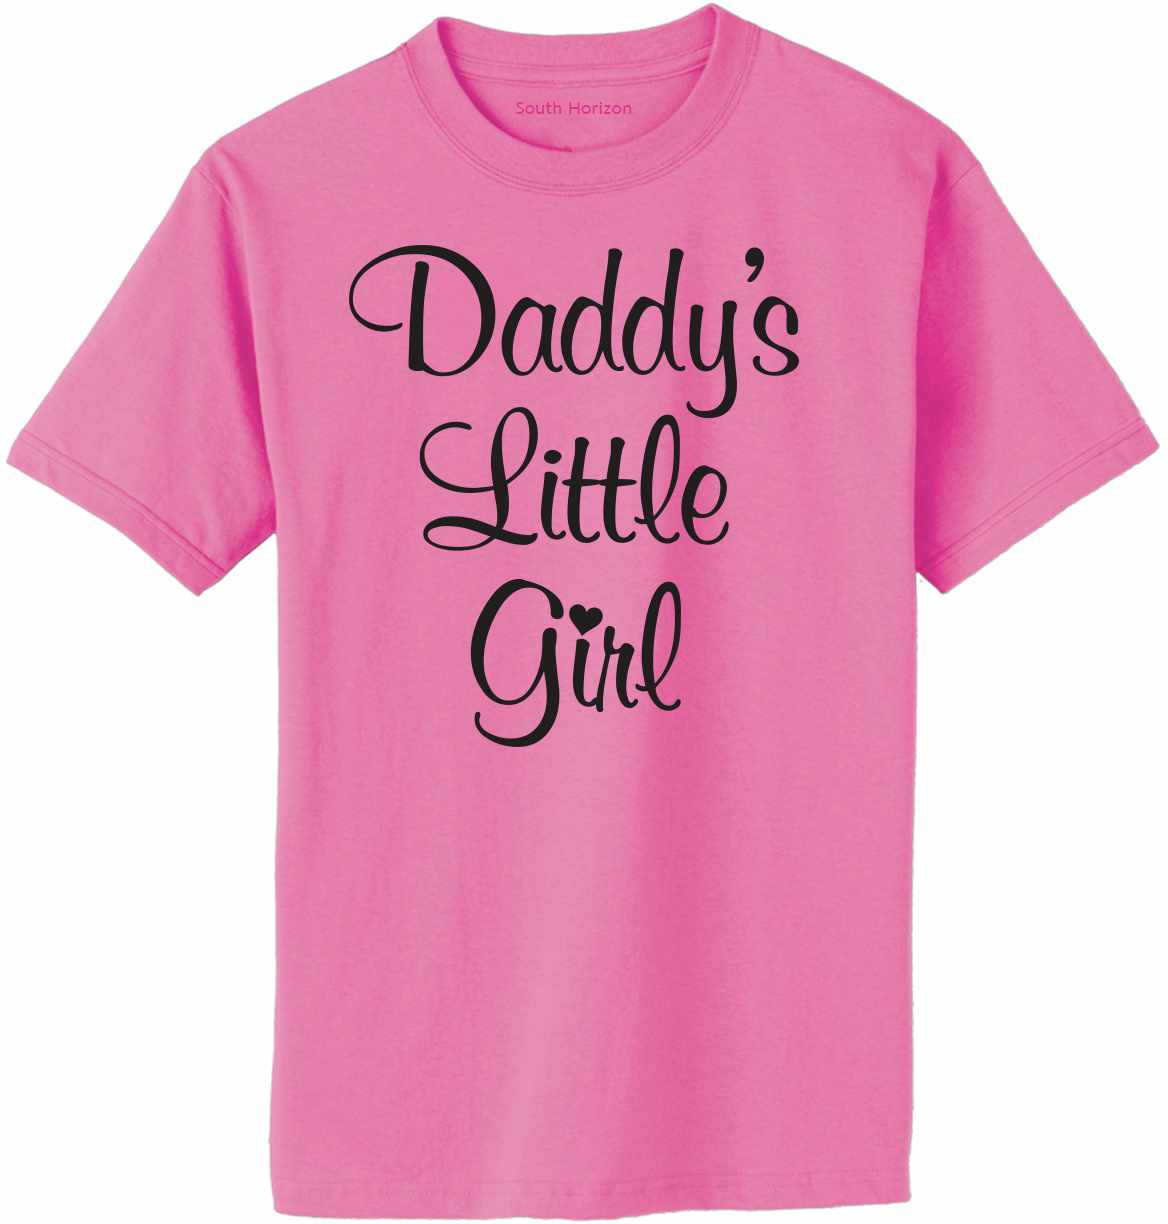 Daddy's Little Girl on Adult T-Shirt (#1294-1)